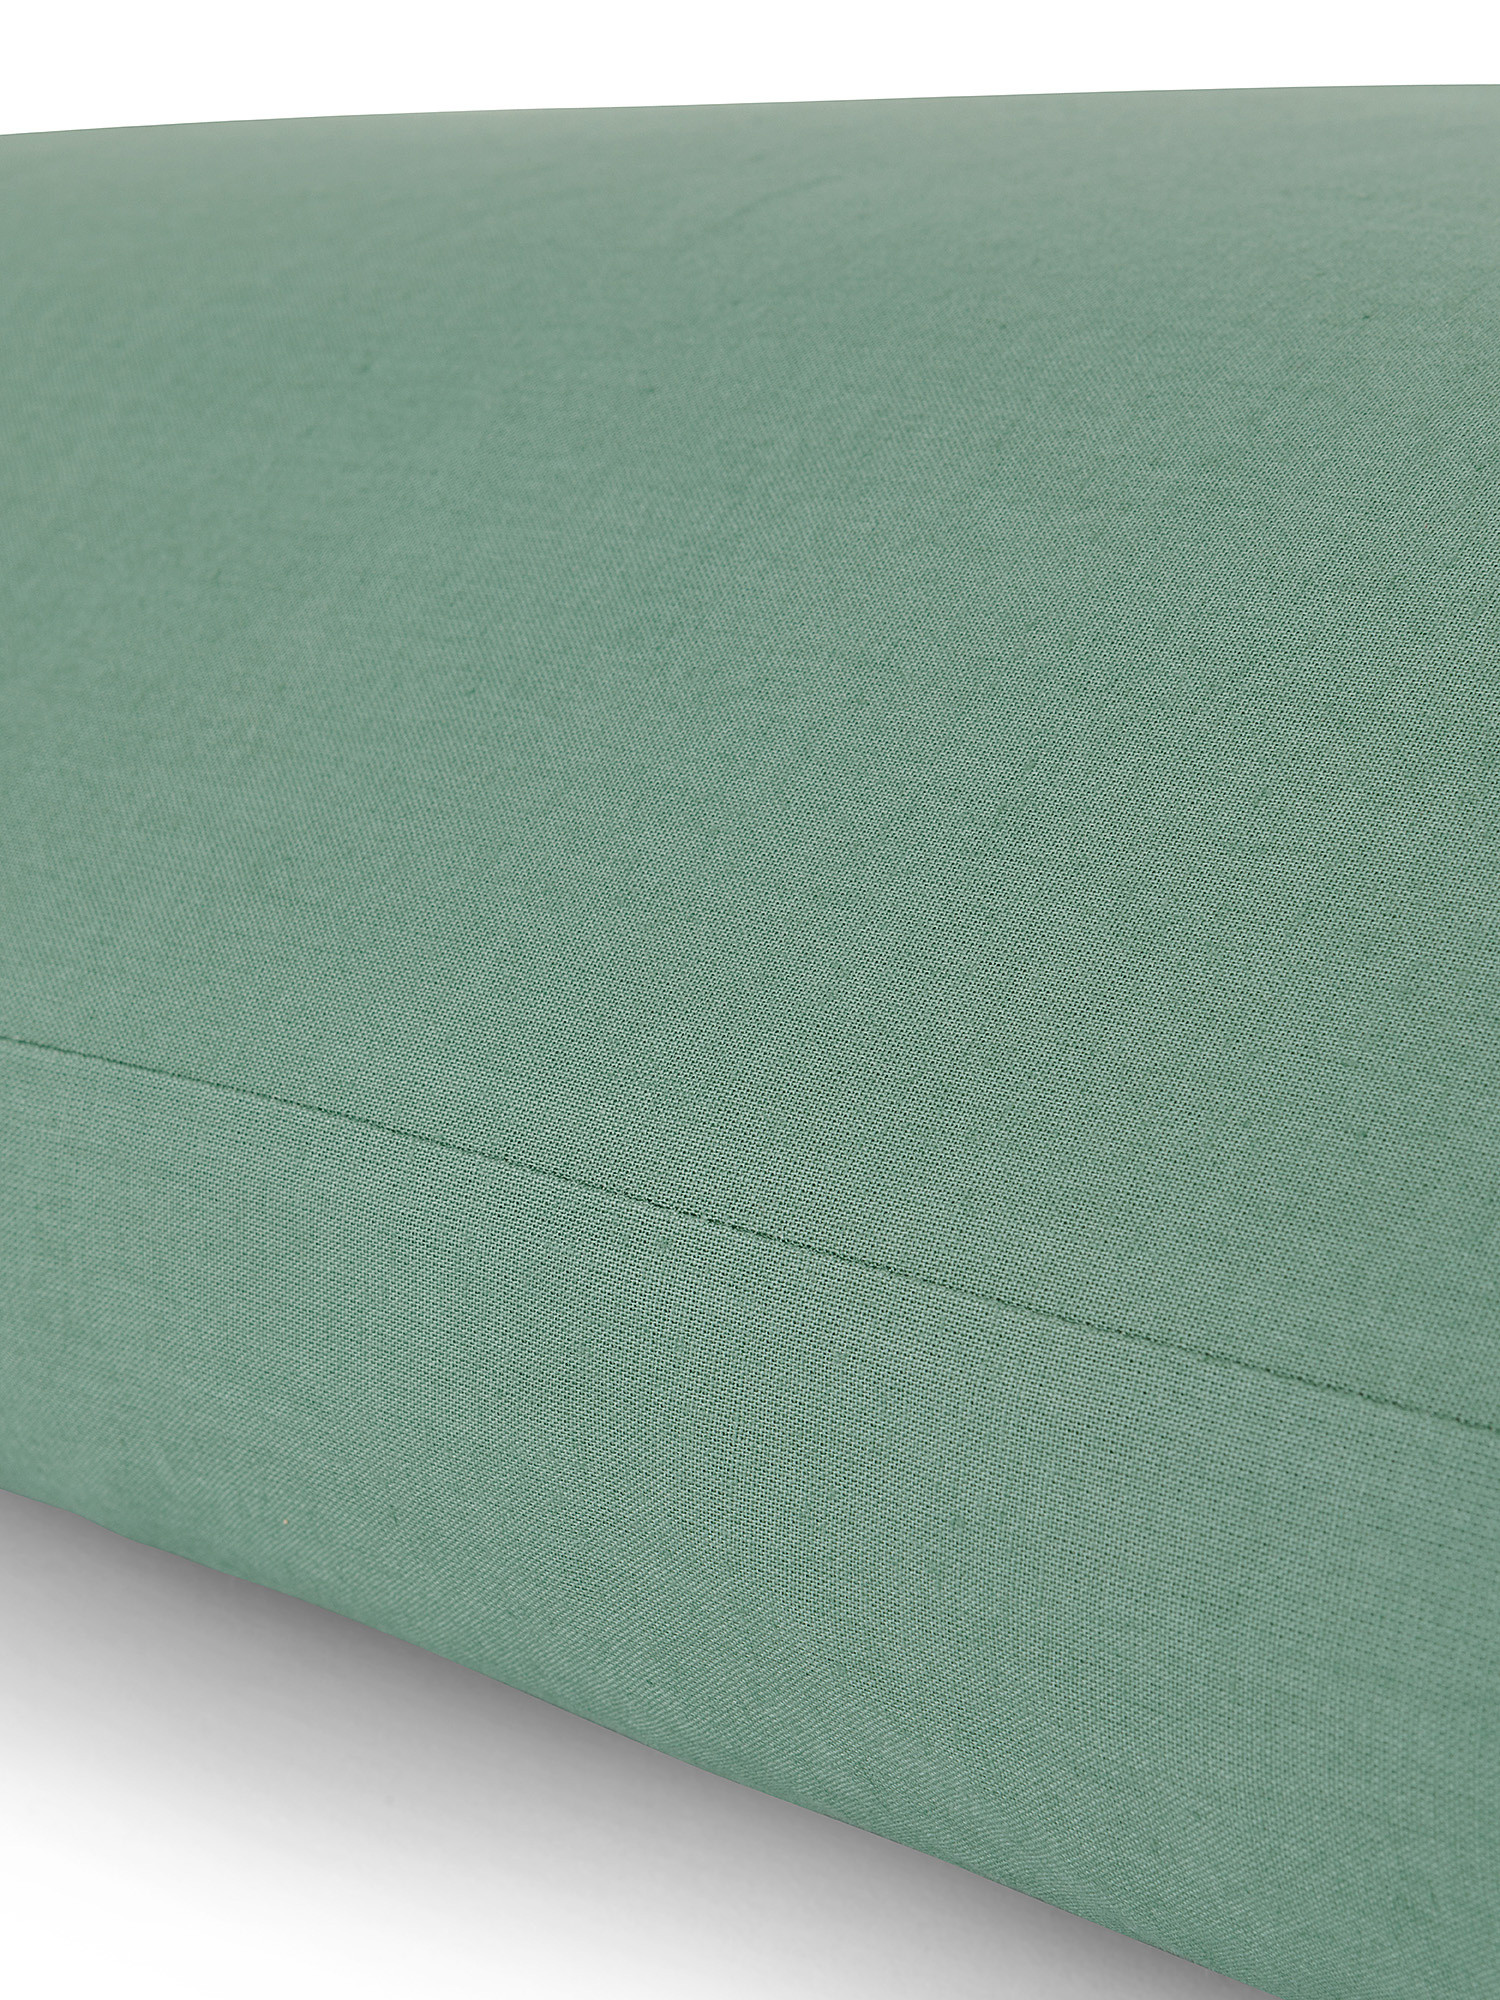 Solid color 100% cotton pillowcase, Green, large image number 1